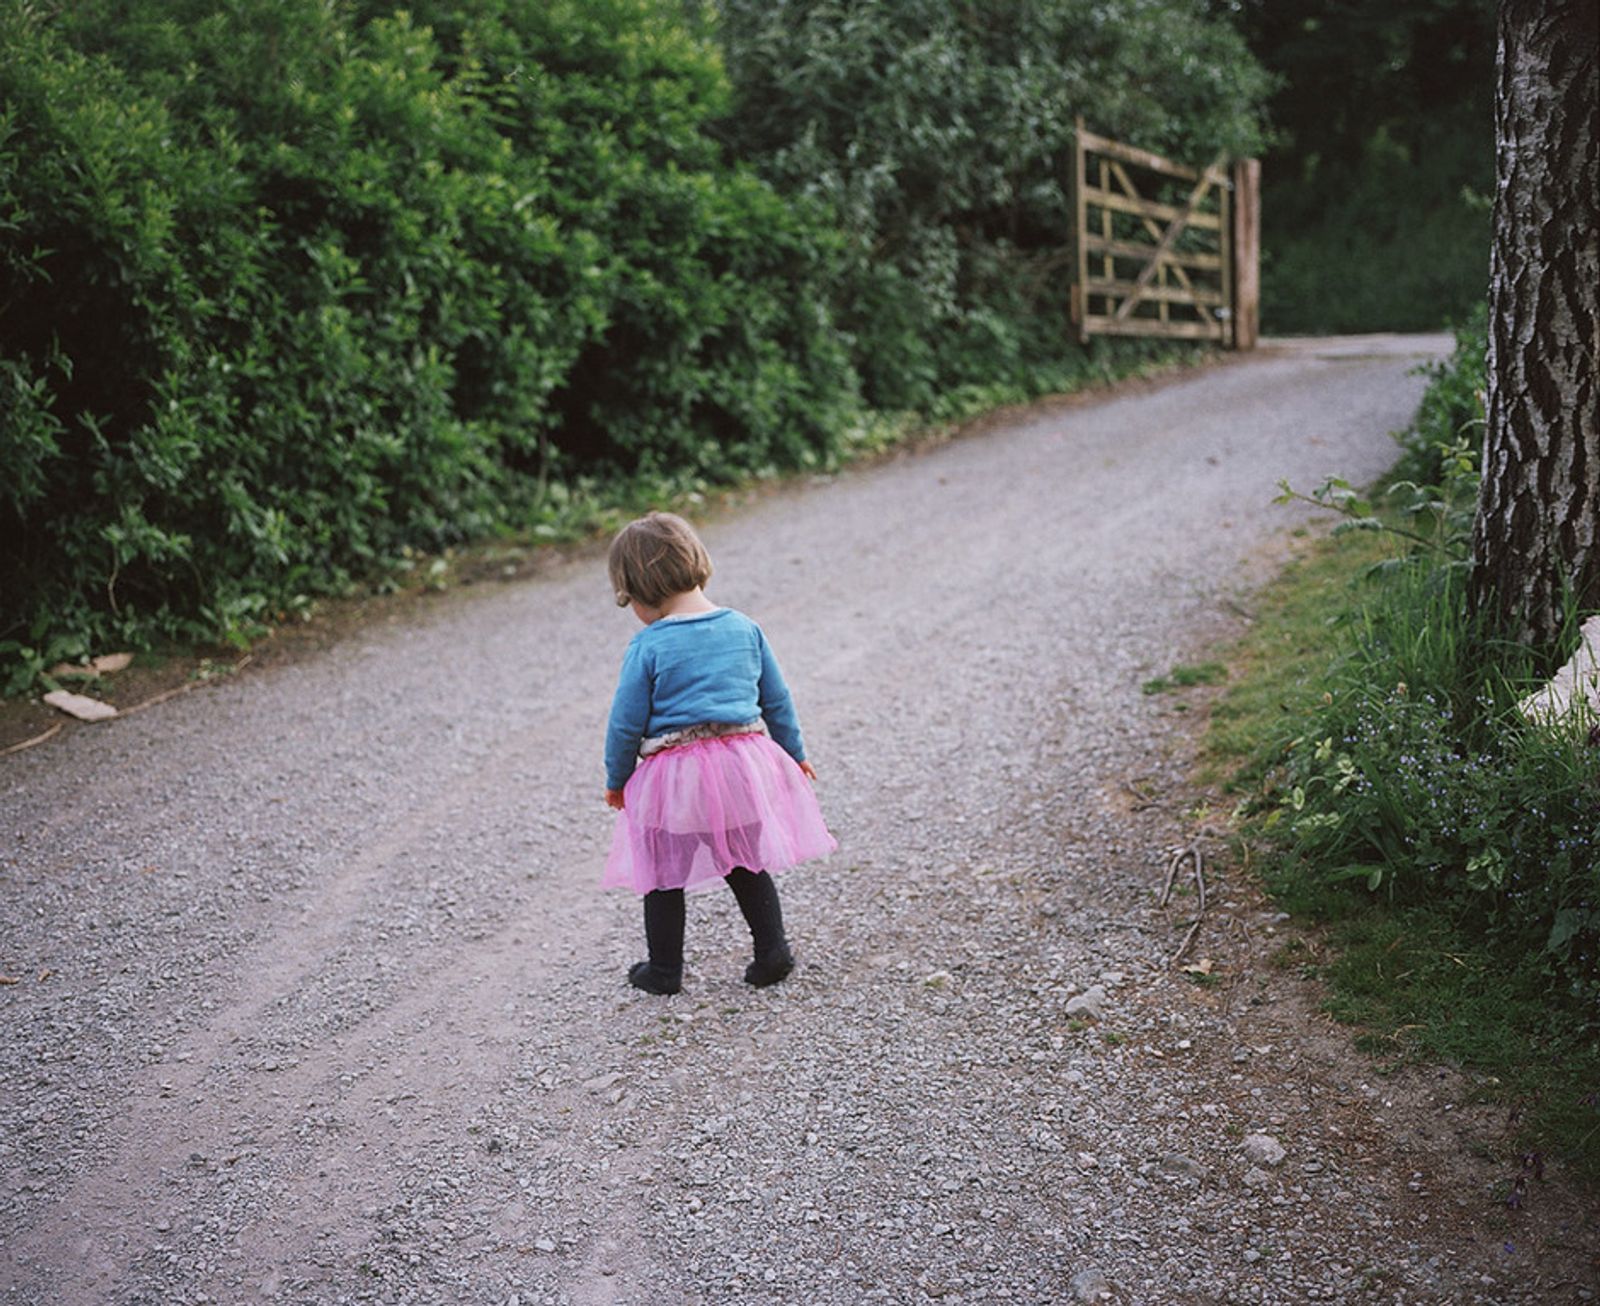 © Sian Davey - Image from the Looking for Alice photography project